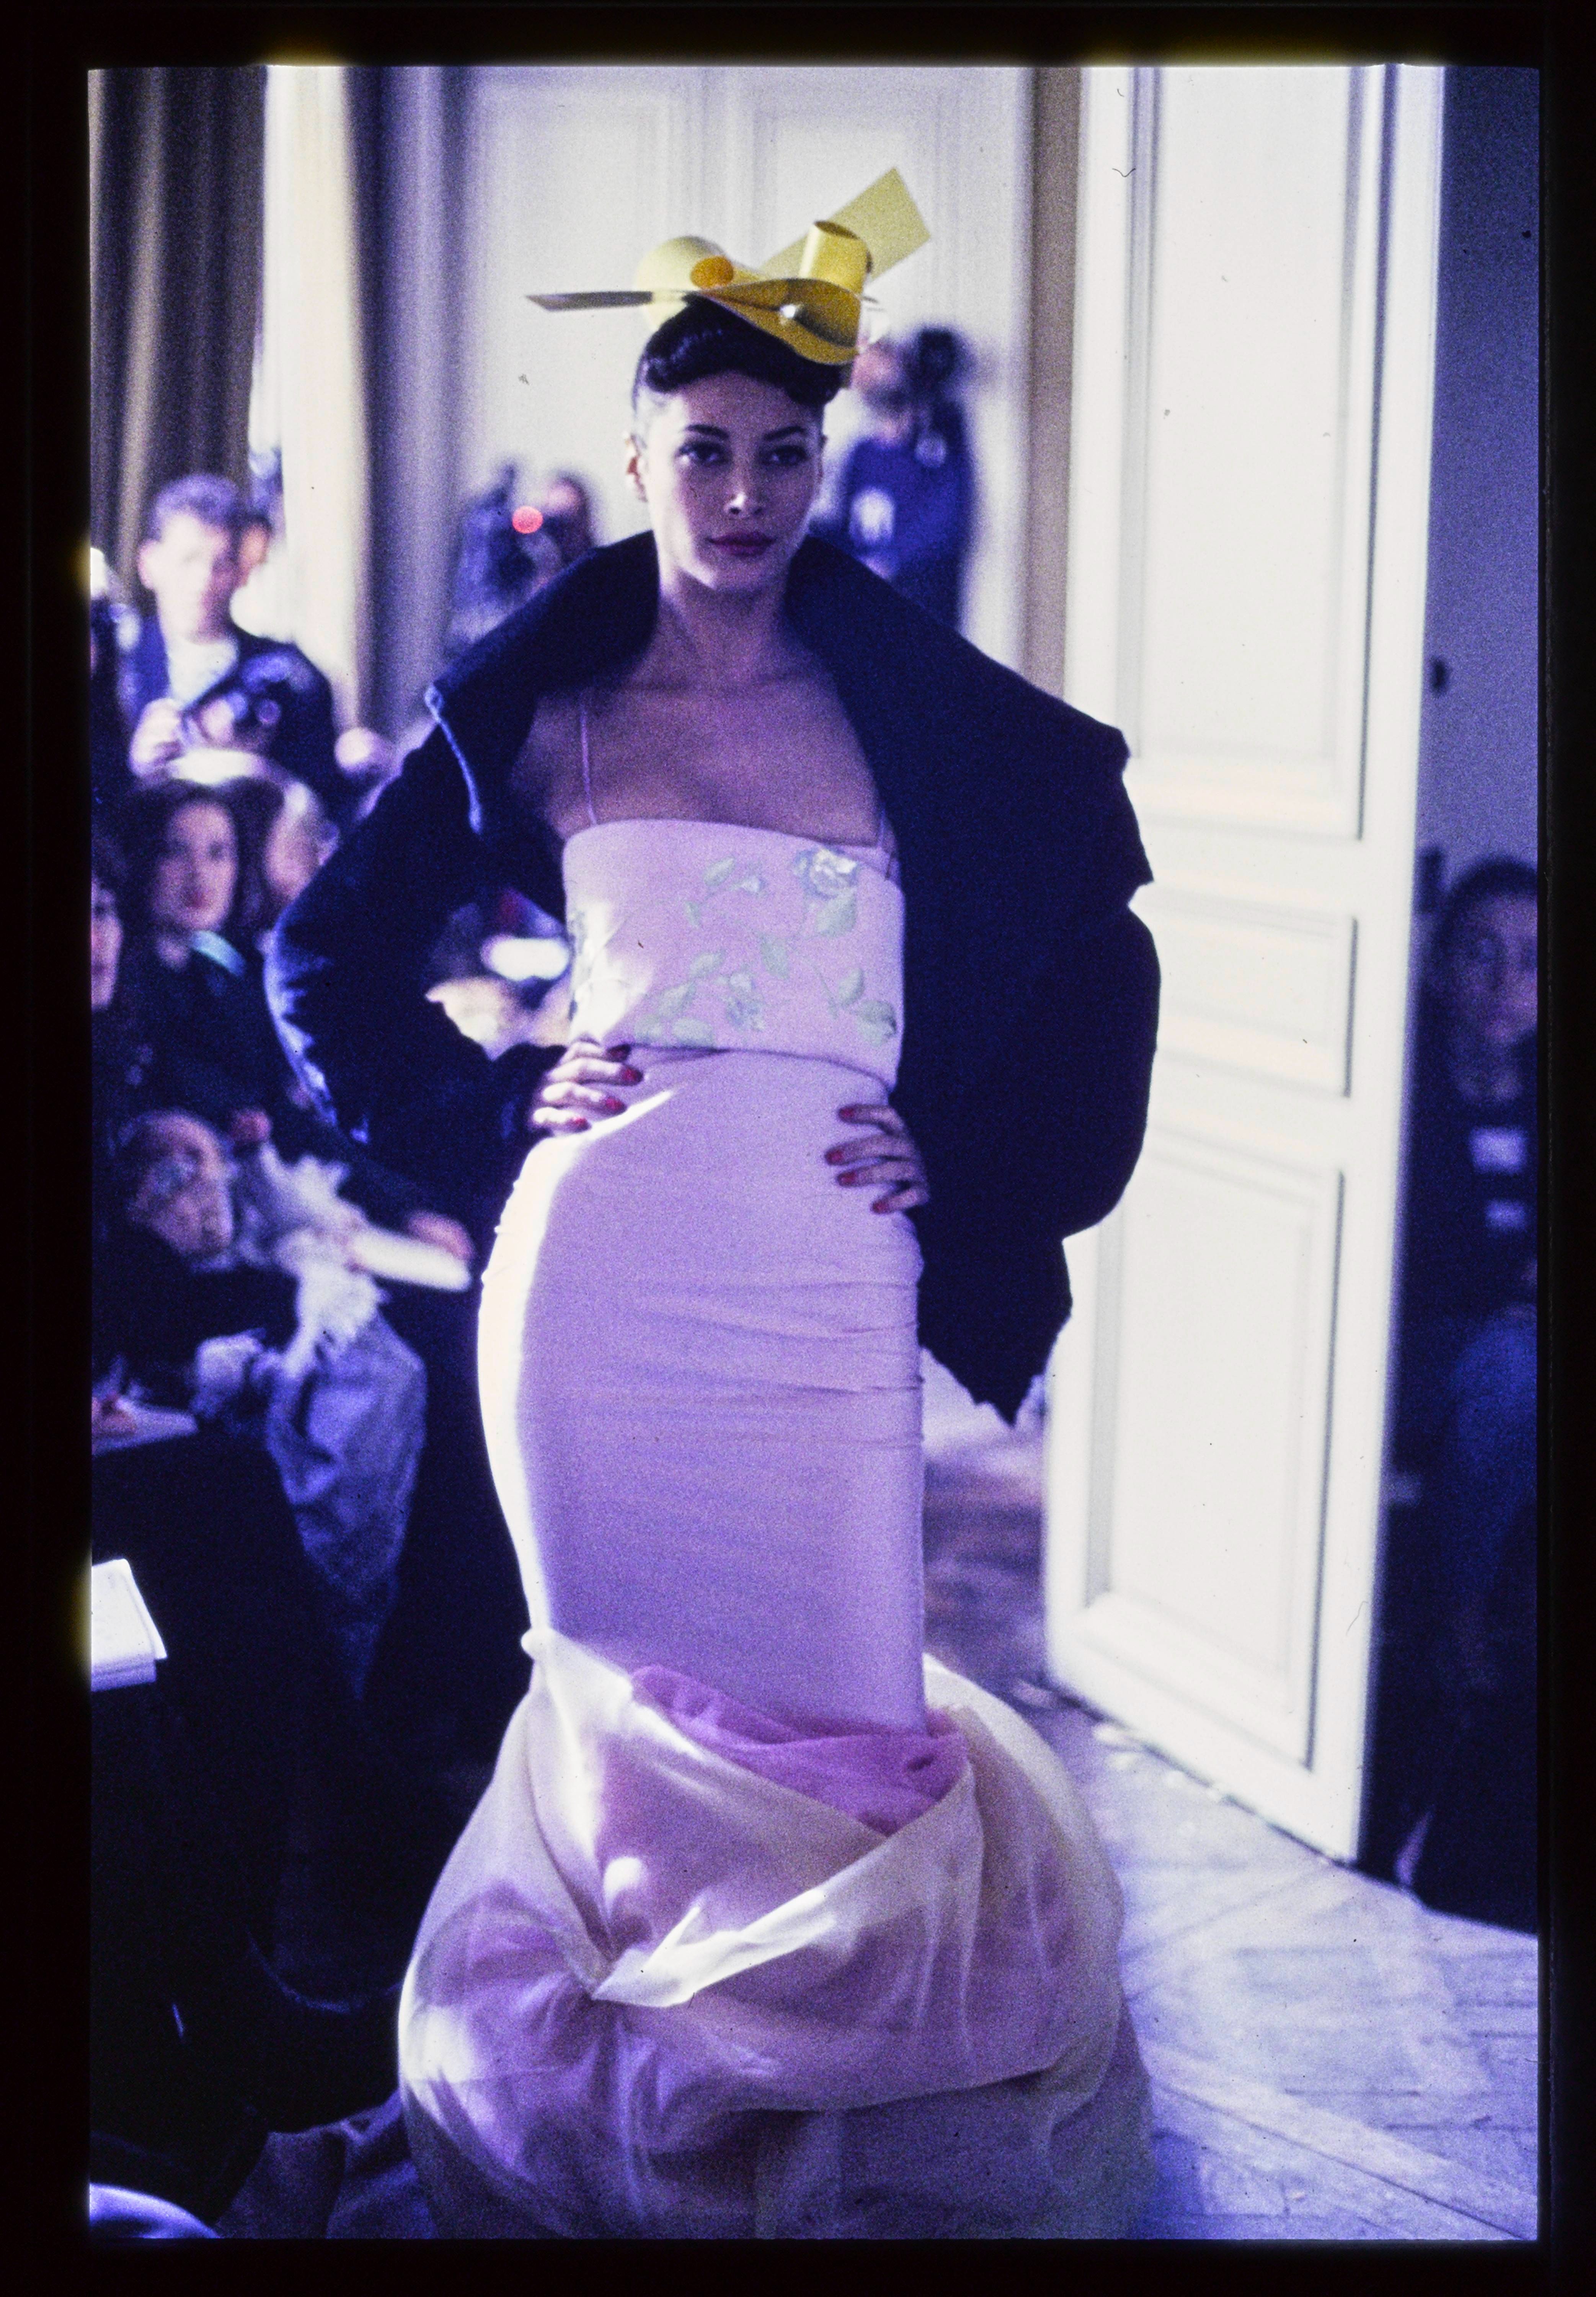 Tim Blanks' Top Fashion Shows of All-Time: John Galliano, Ready-to-Wear  Autumn/Winter 1994